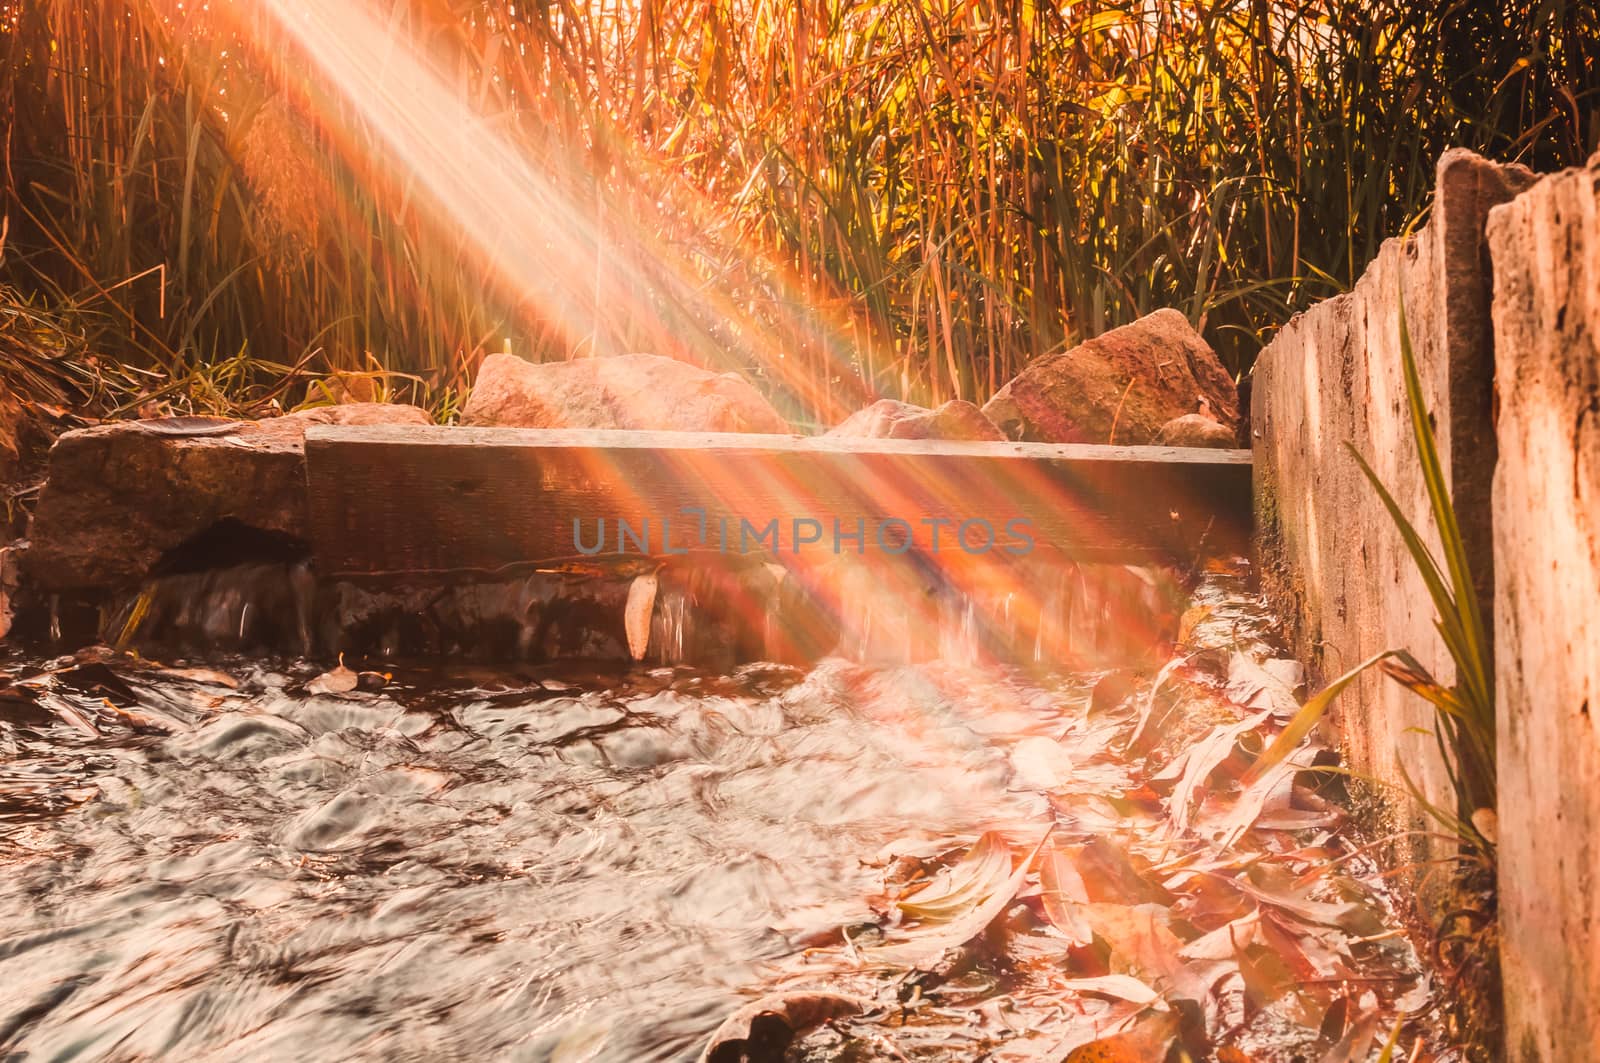 ray of sunlight illuminates small river near forest in October.Around is dry grass and fallen leaves,stones,reservoir with small waterfall and threshold.The concept of the autumn landscape.